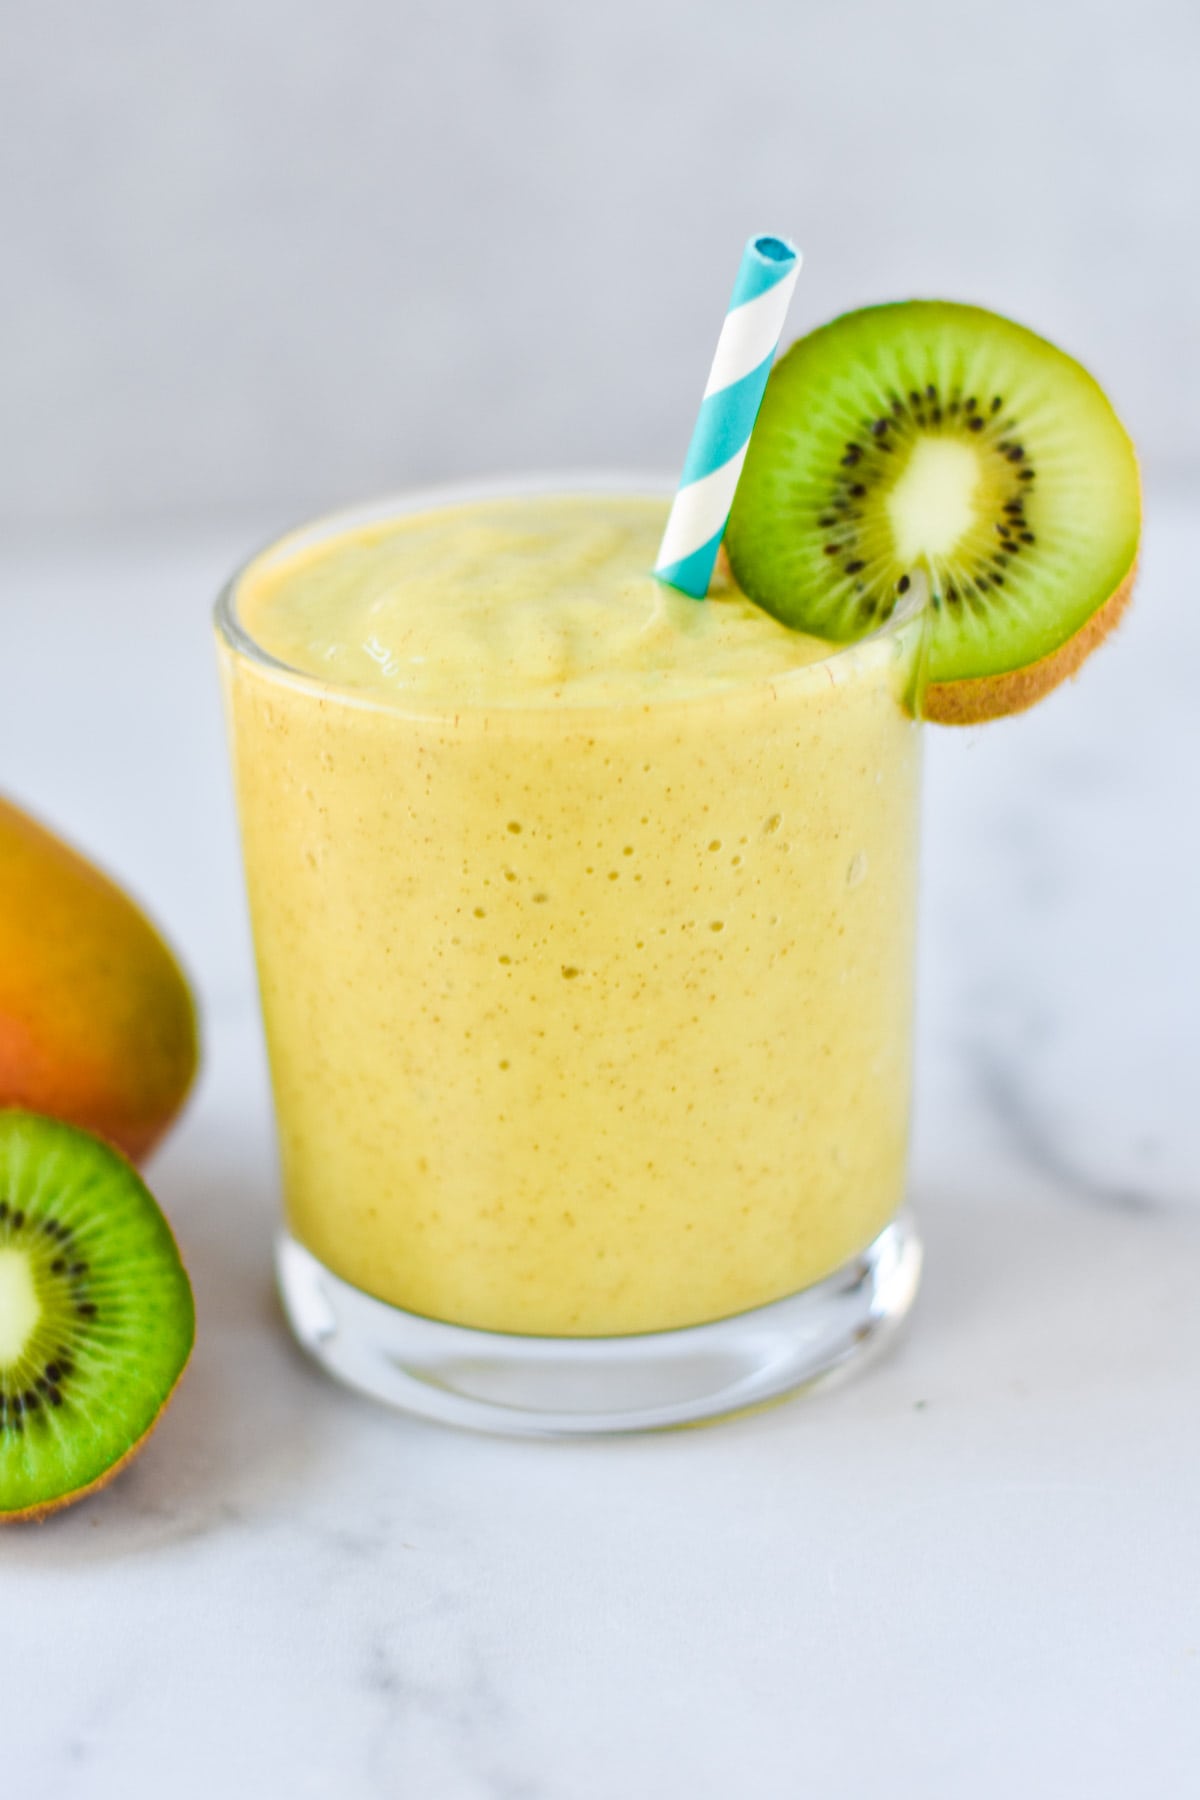 A yellow smoothie in a short glass with a kiwi on the rim.